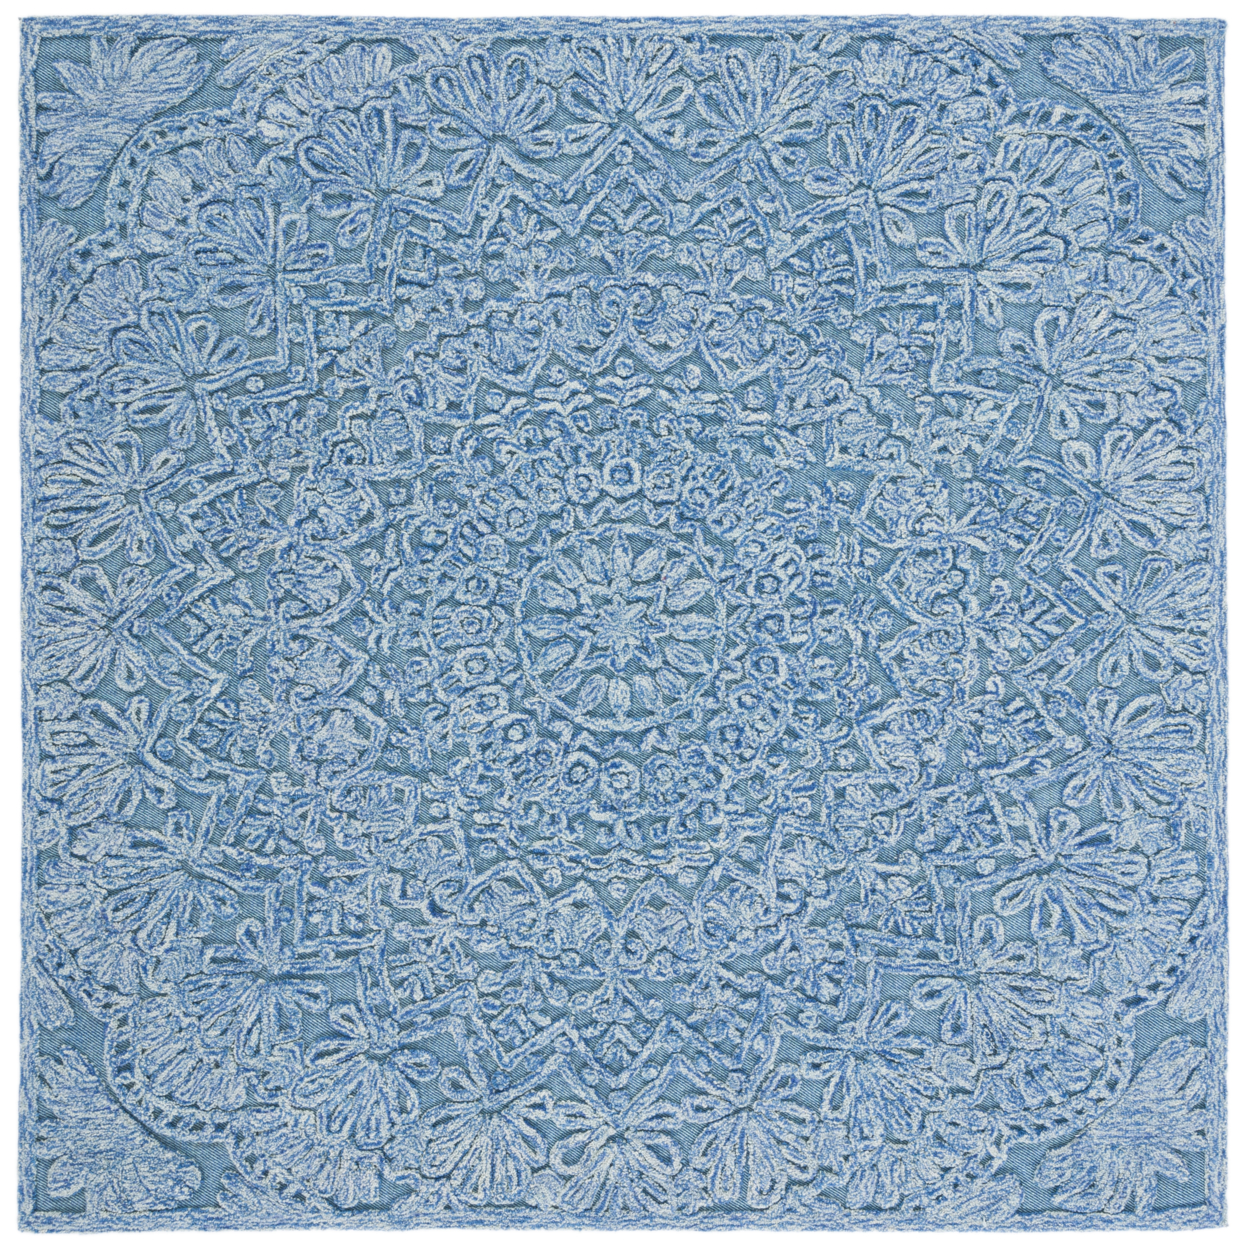 SAFAVIEH Trace Collection TRC601M Blue / Light Green Rug - 6' Square